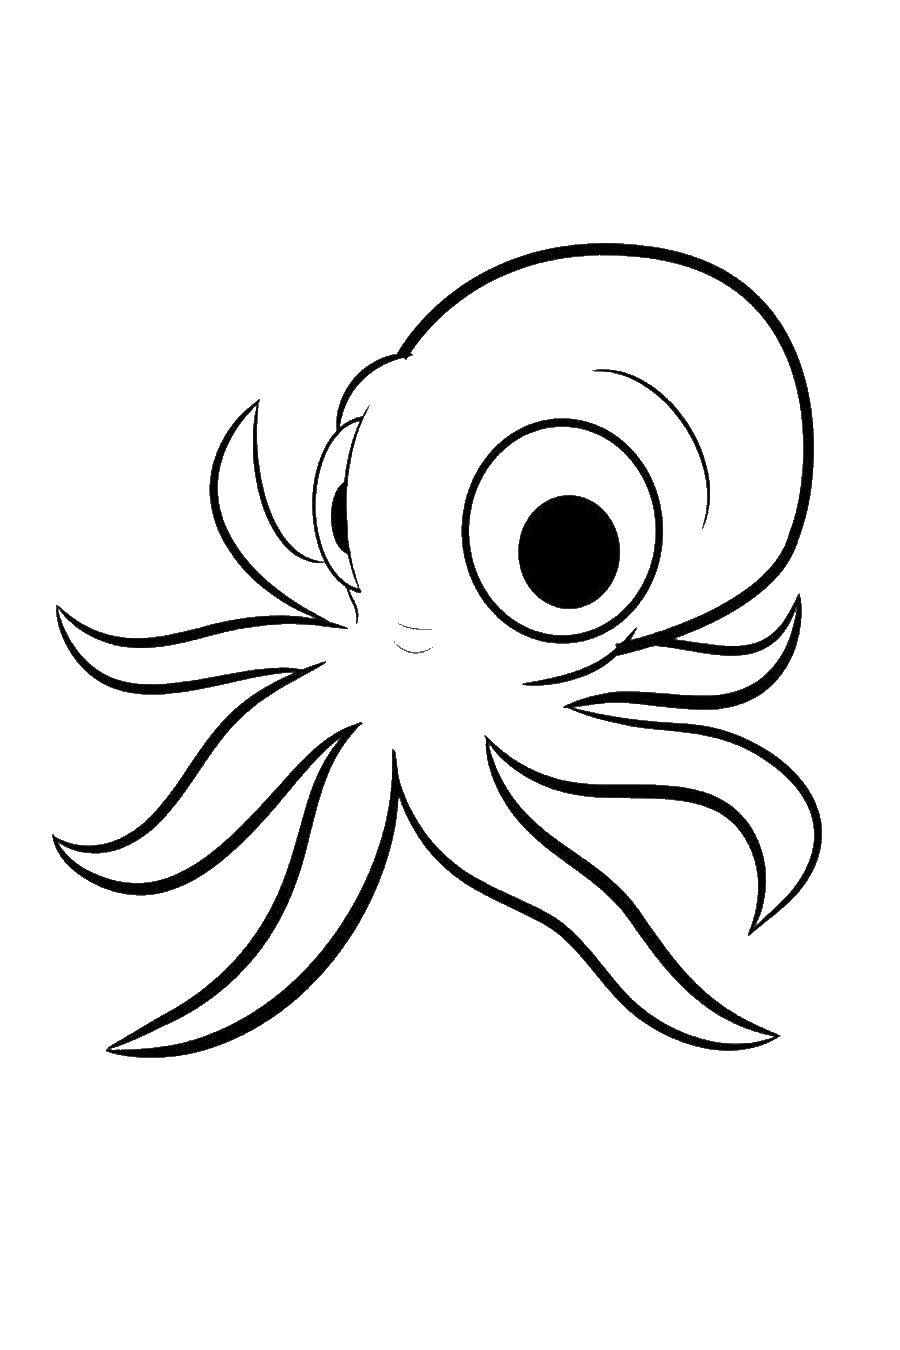 Coloring Octopus. Category marine animals. Tags:  Octopus.